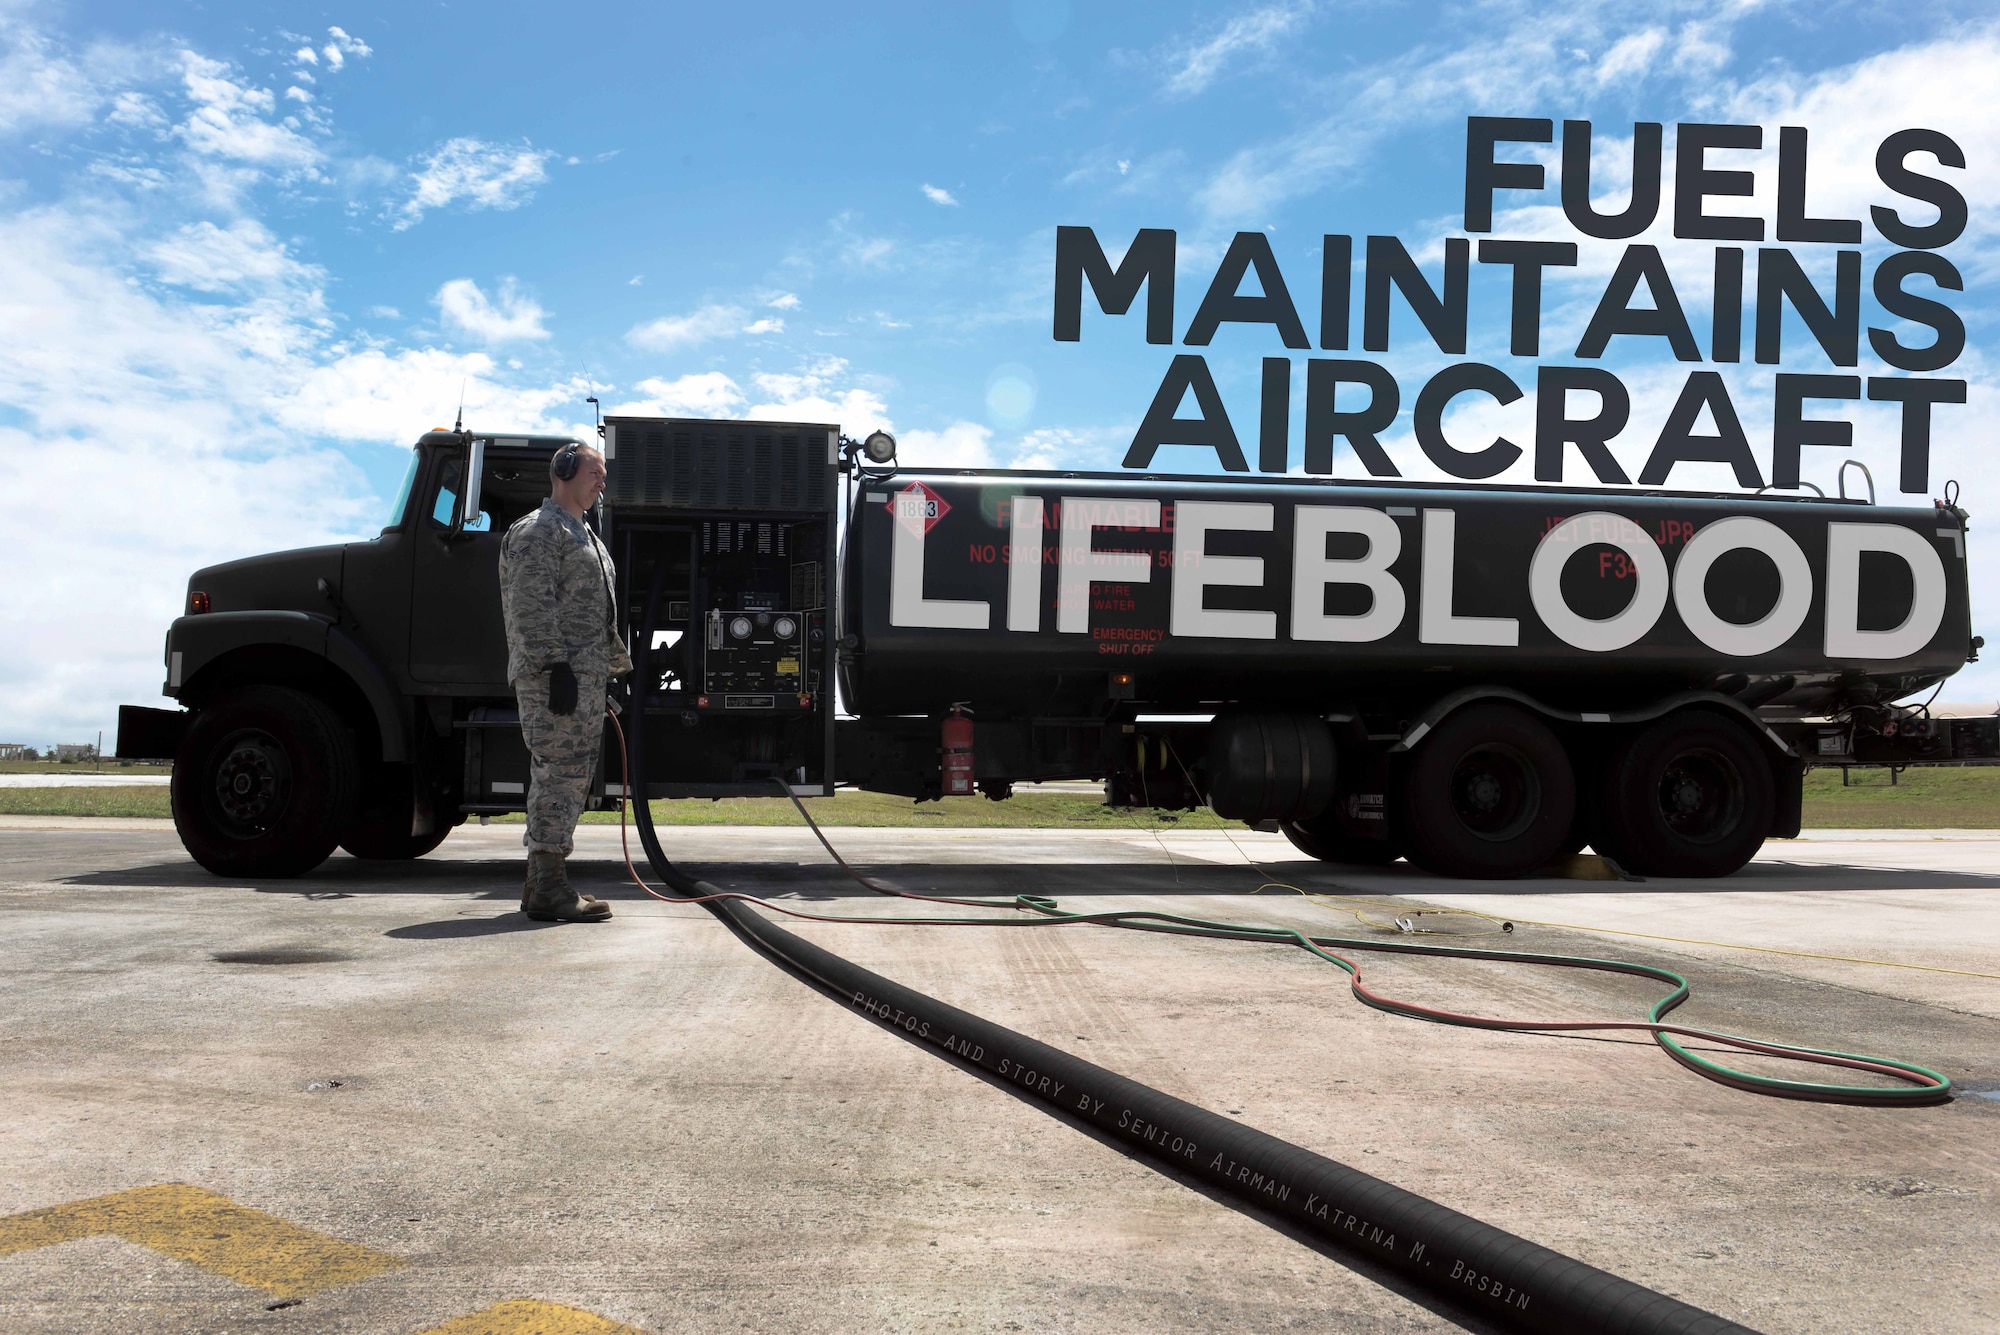 Senior Airman Jeffrey Reed, 36th Logistics Readiness Squadron fuels distribution operator, observes an aircraft being fueled April 8, 2015, at Andersen Air Force Base, Guam. More than 67 logistics readiness squadron Airmen work together in the fuels management flight to pump an average of 115,000 gallons of fuel per day. (U.S. Air Force illustration by Senior Airman Katrina M. Brisbin/Released)